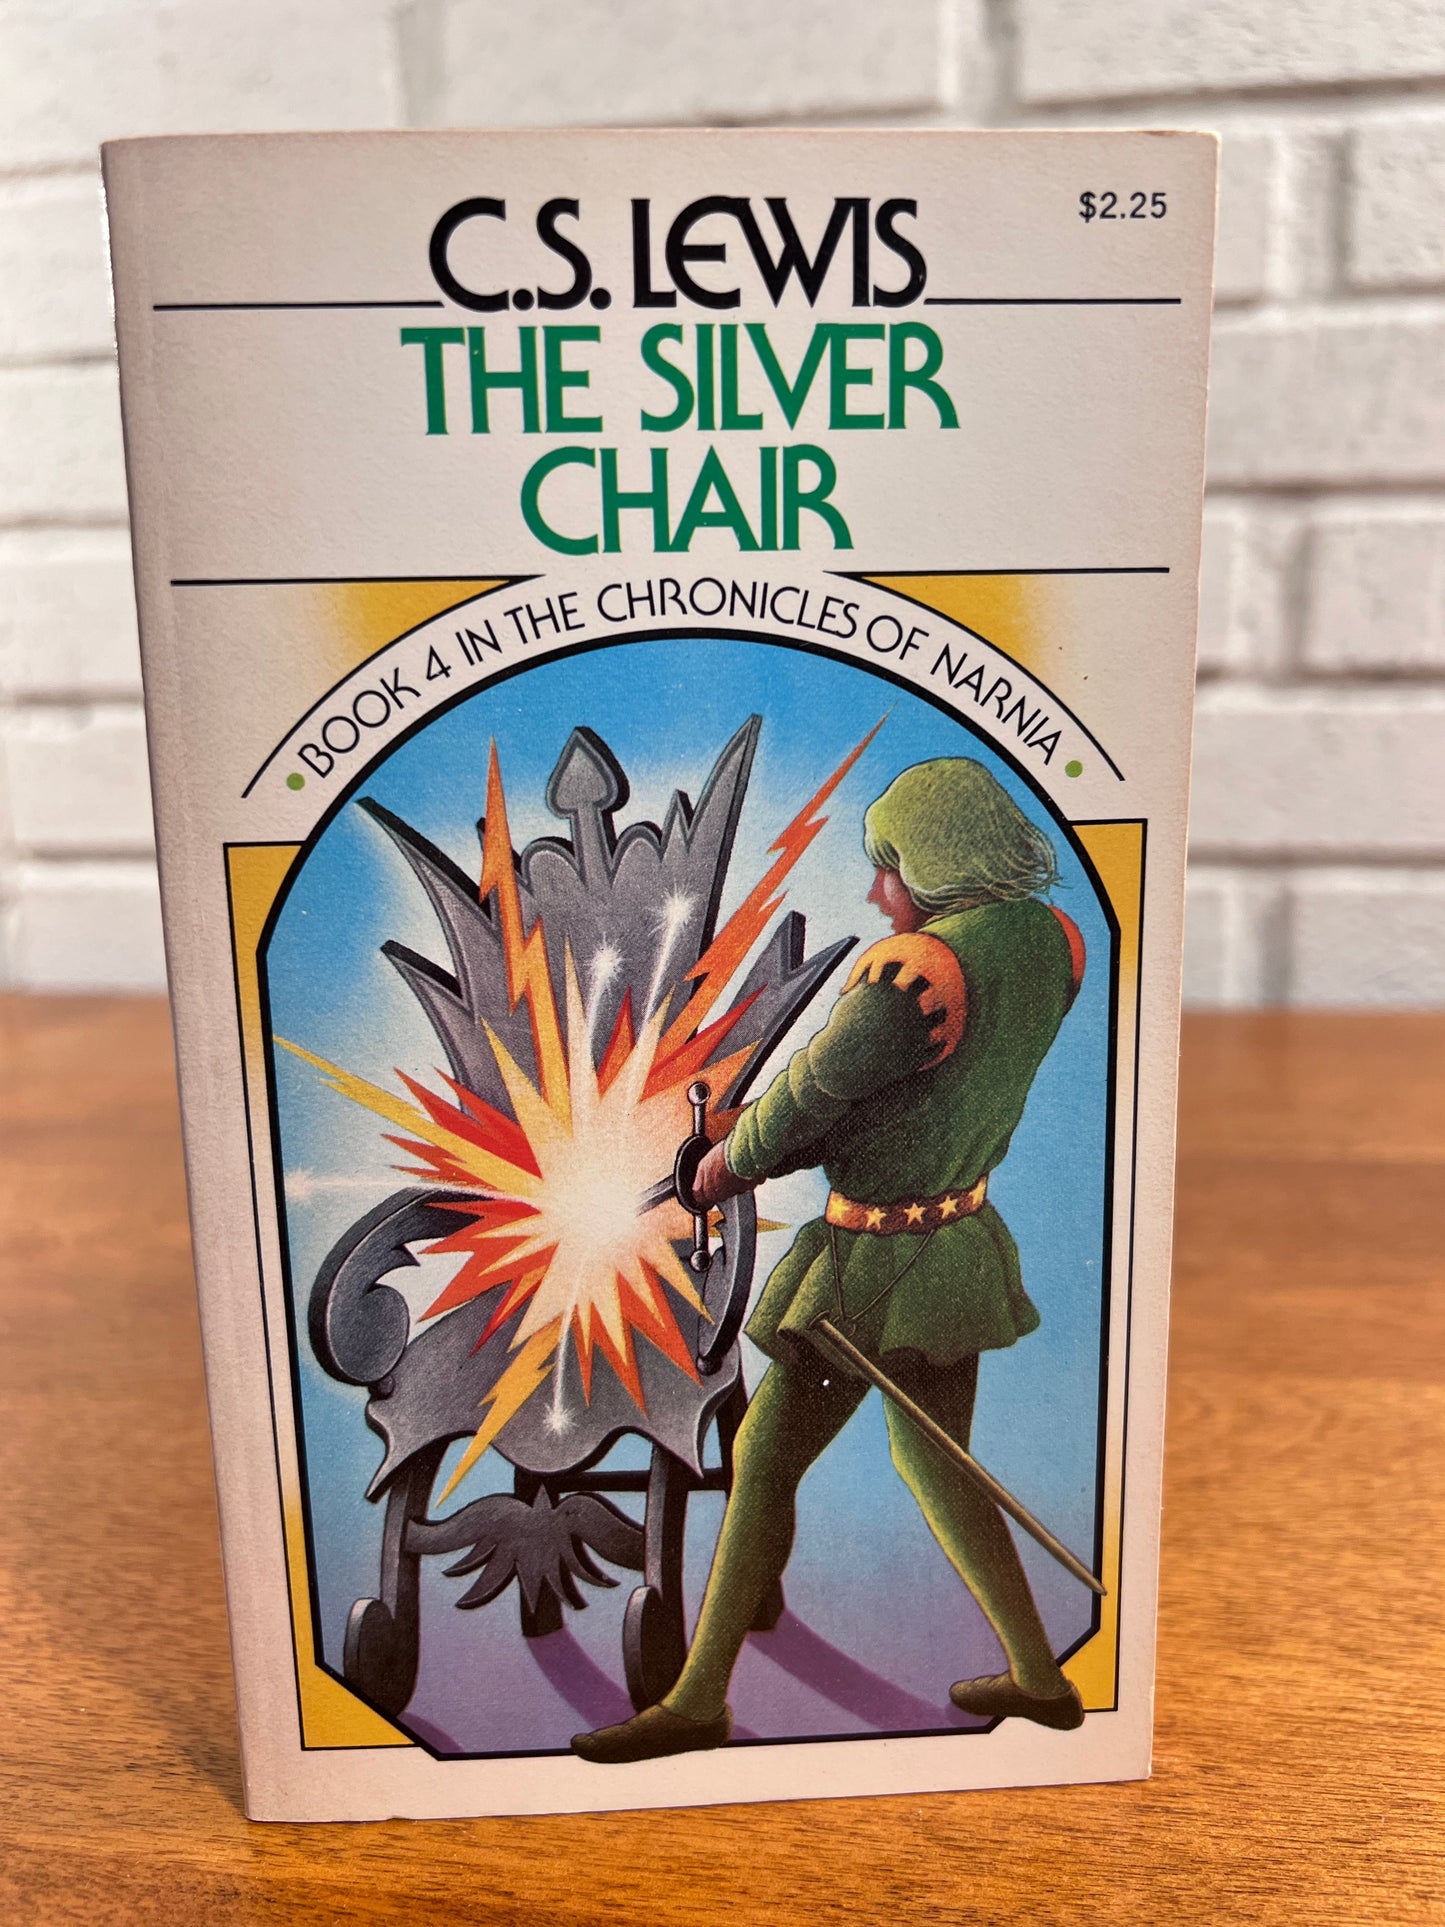 The Silver Chair The Chronicles of Narnia #4 by C.S. Lewis